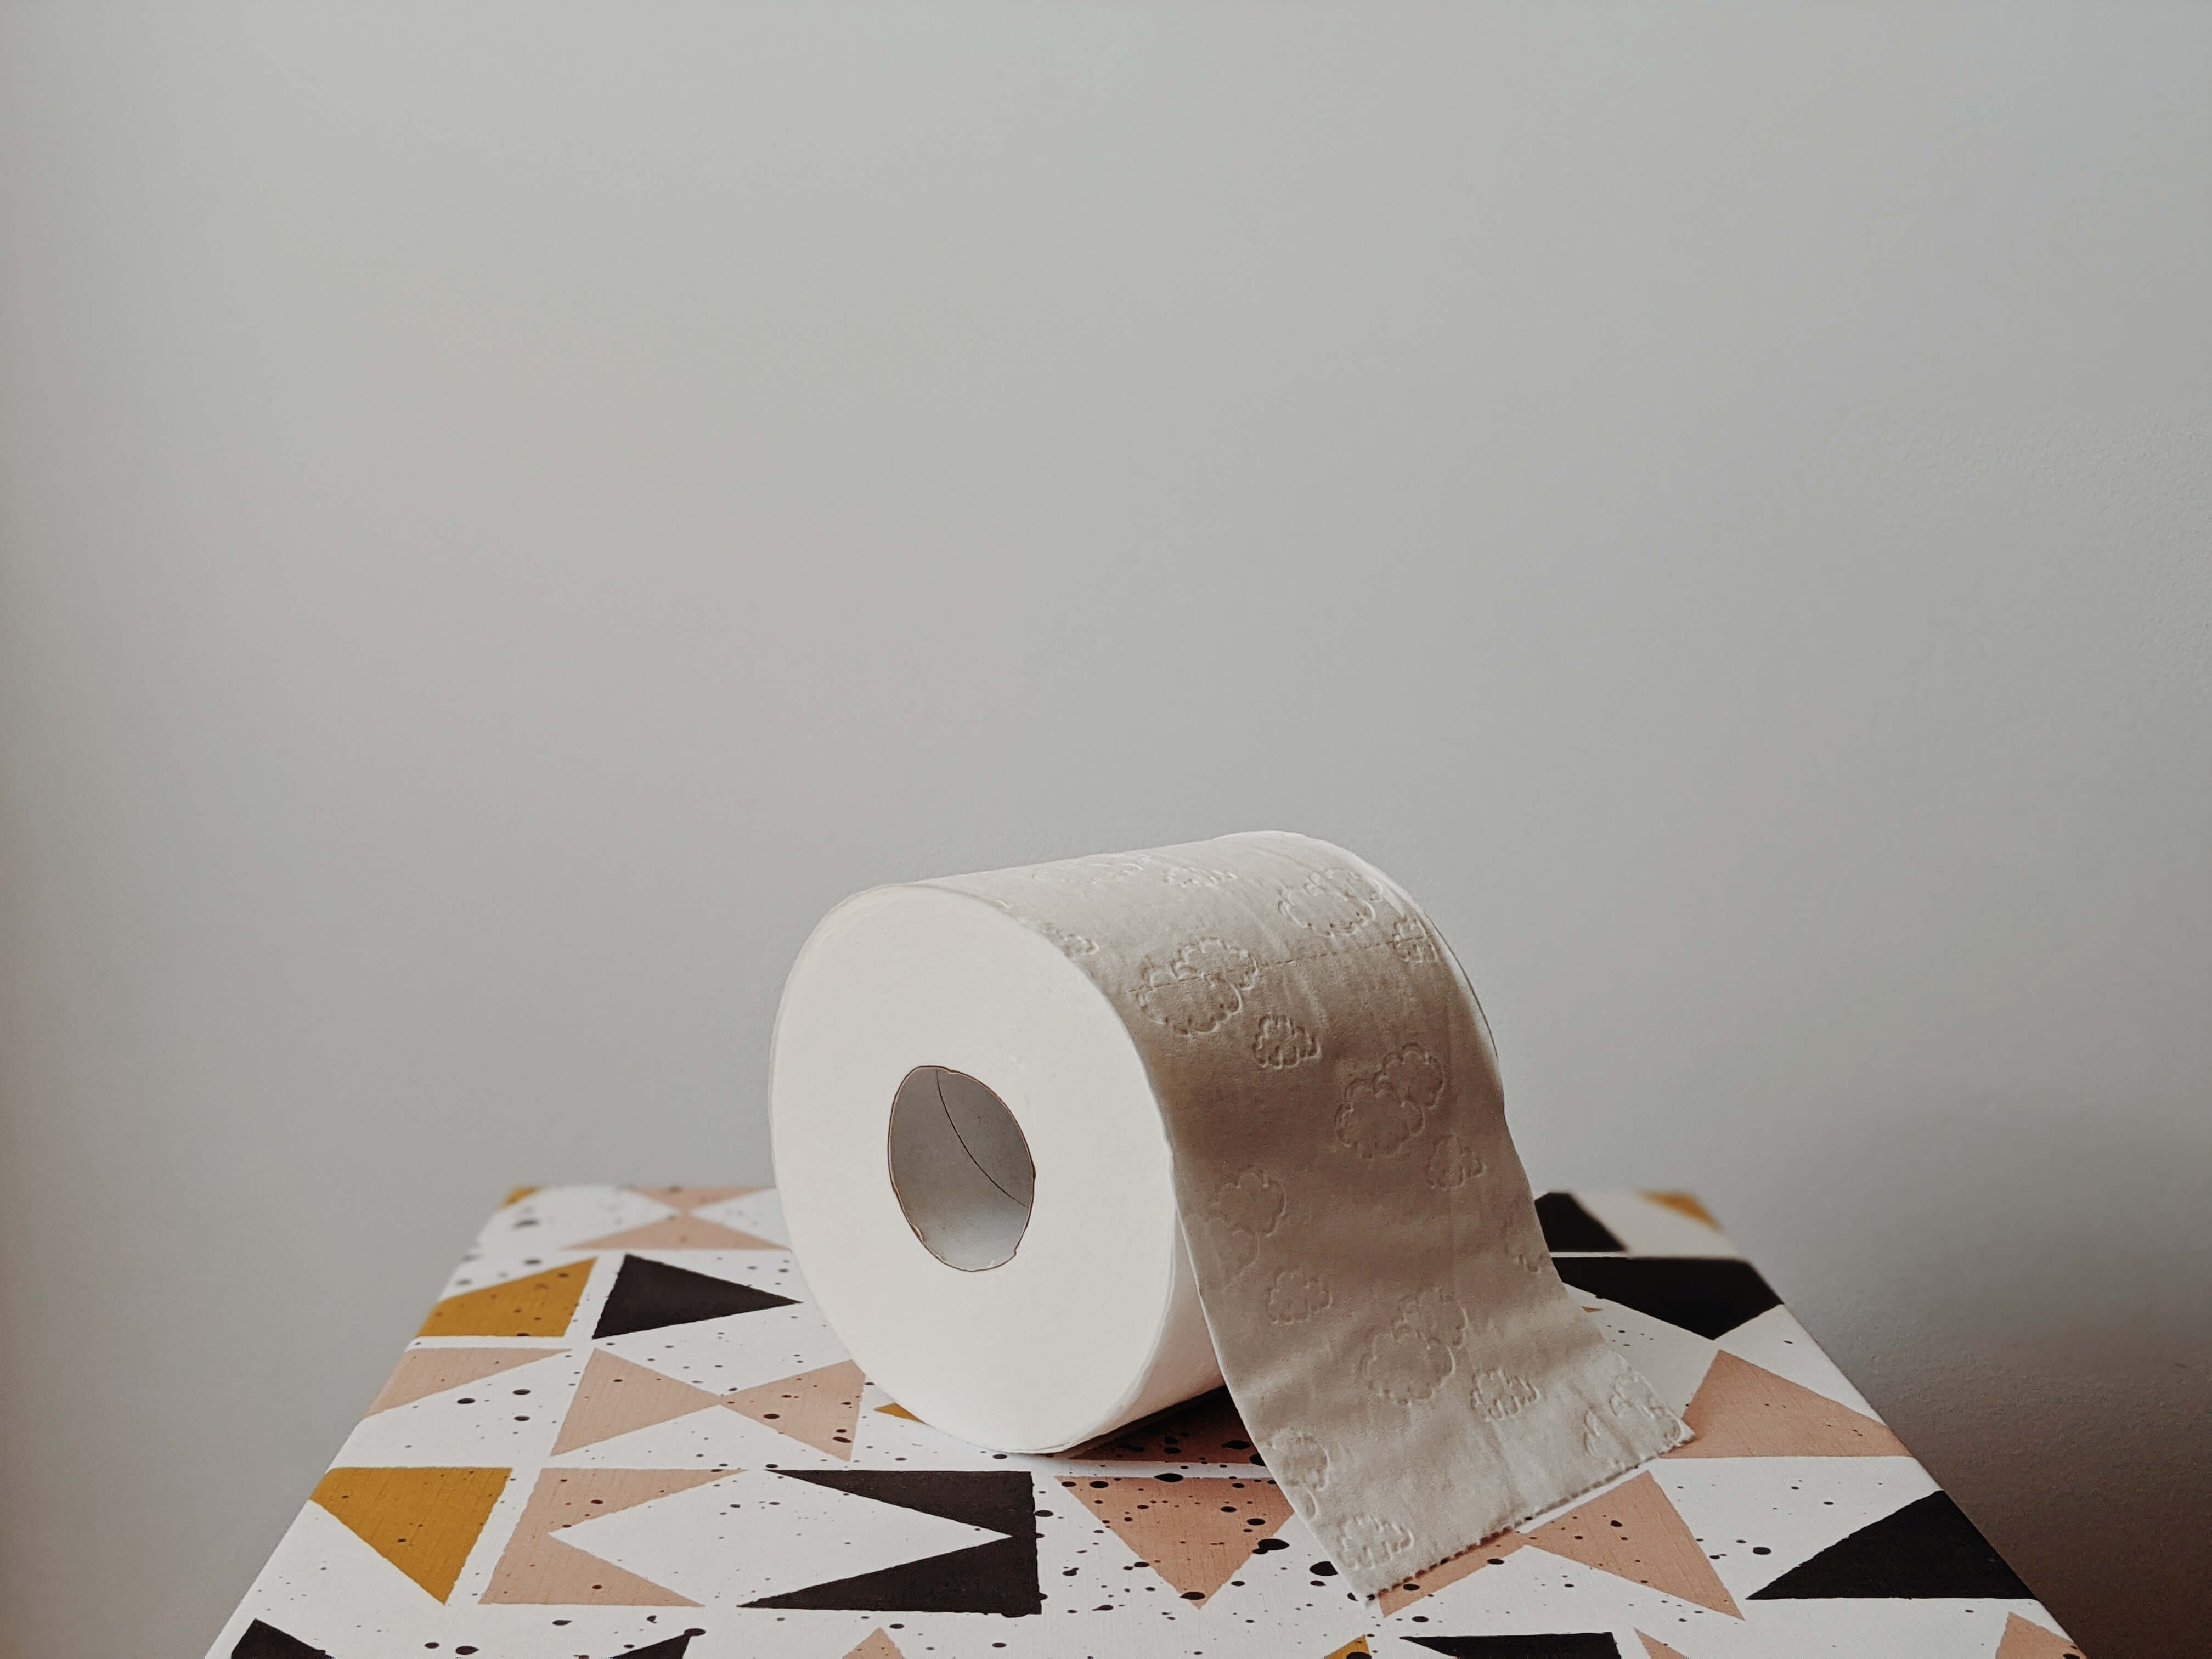 A roll of paper